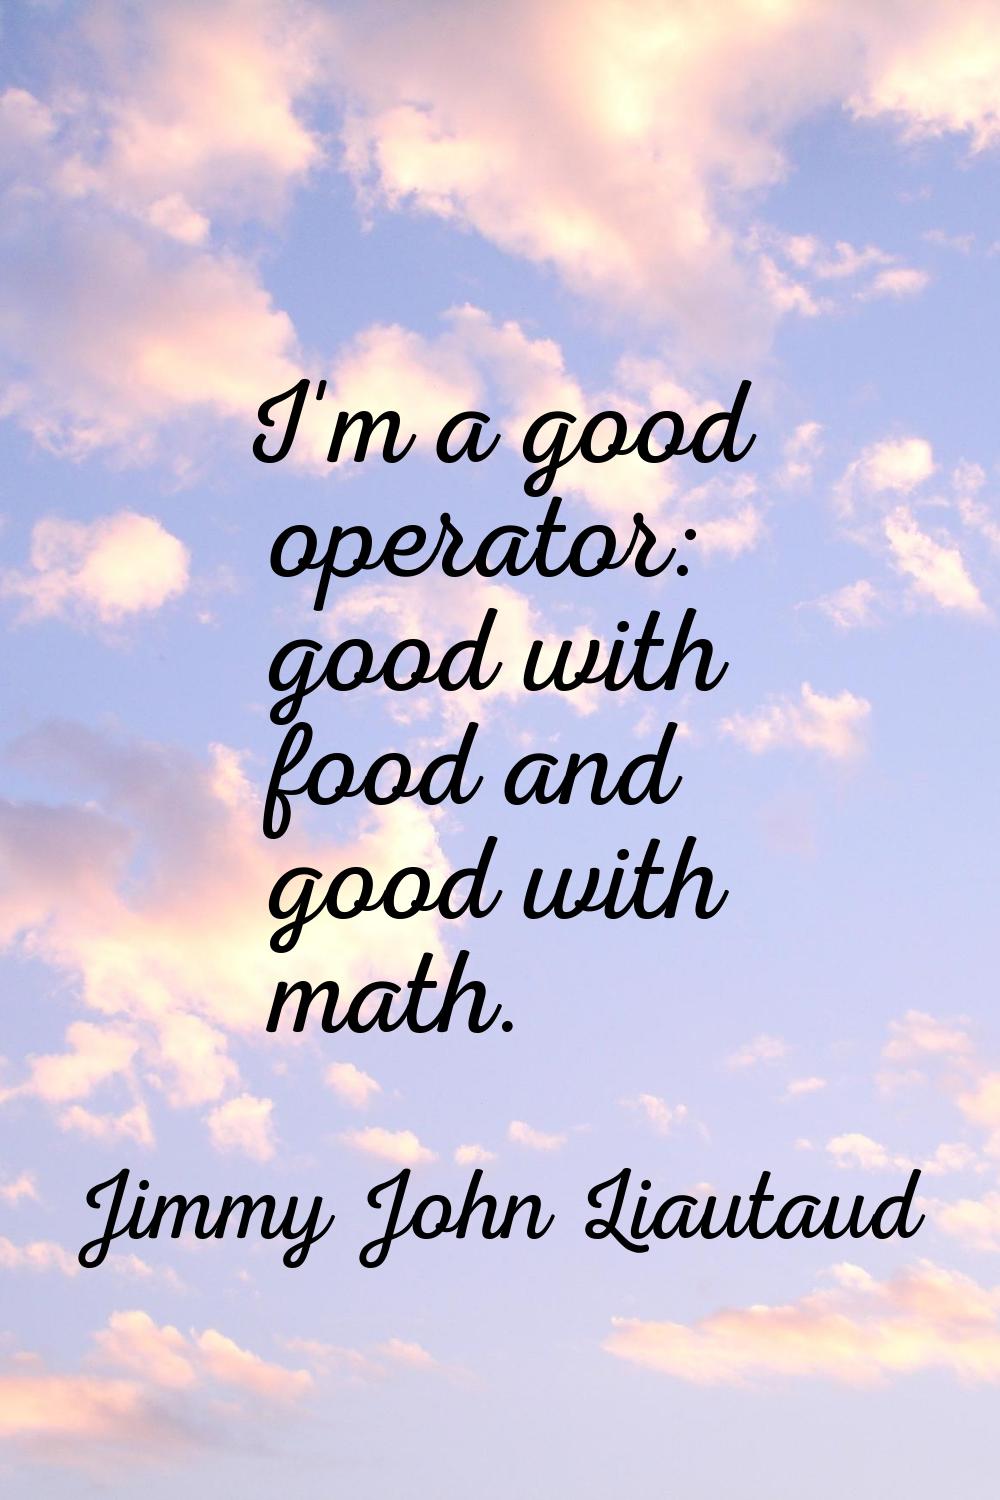 I'm a good operator: good with food and good with math.